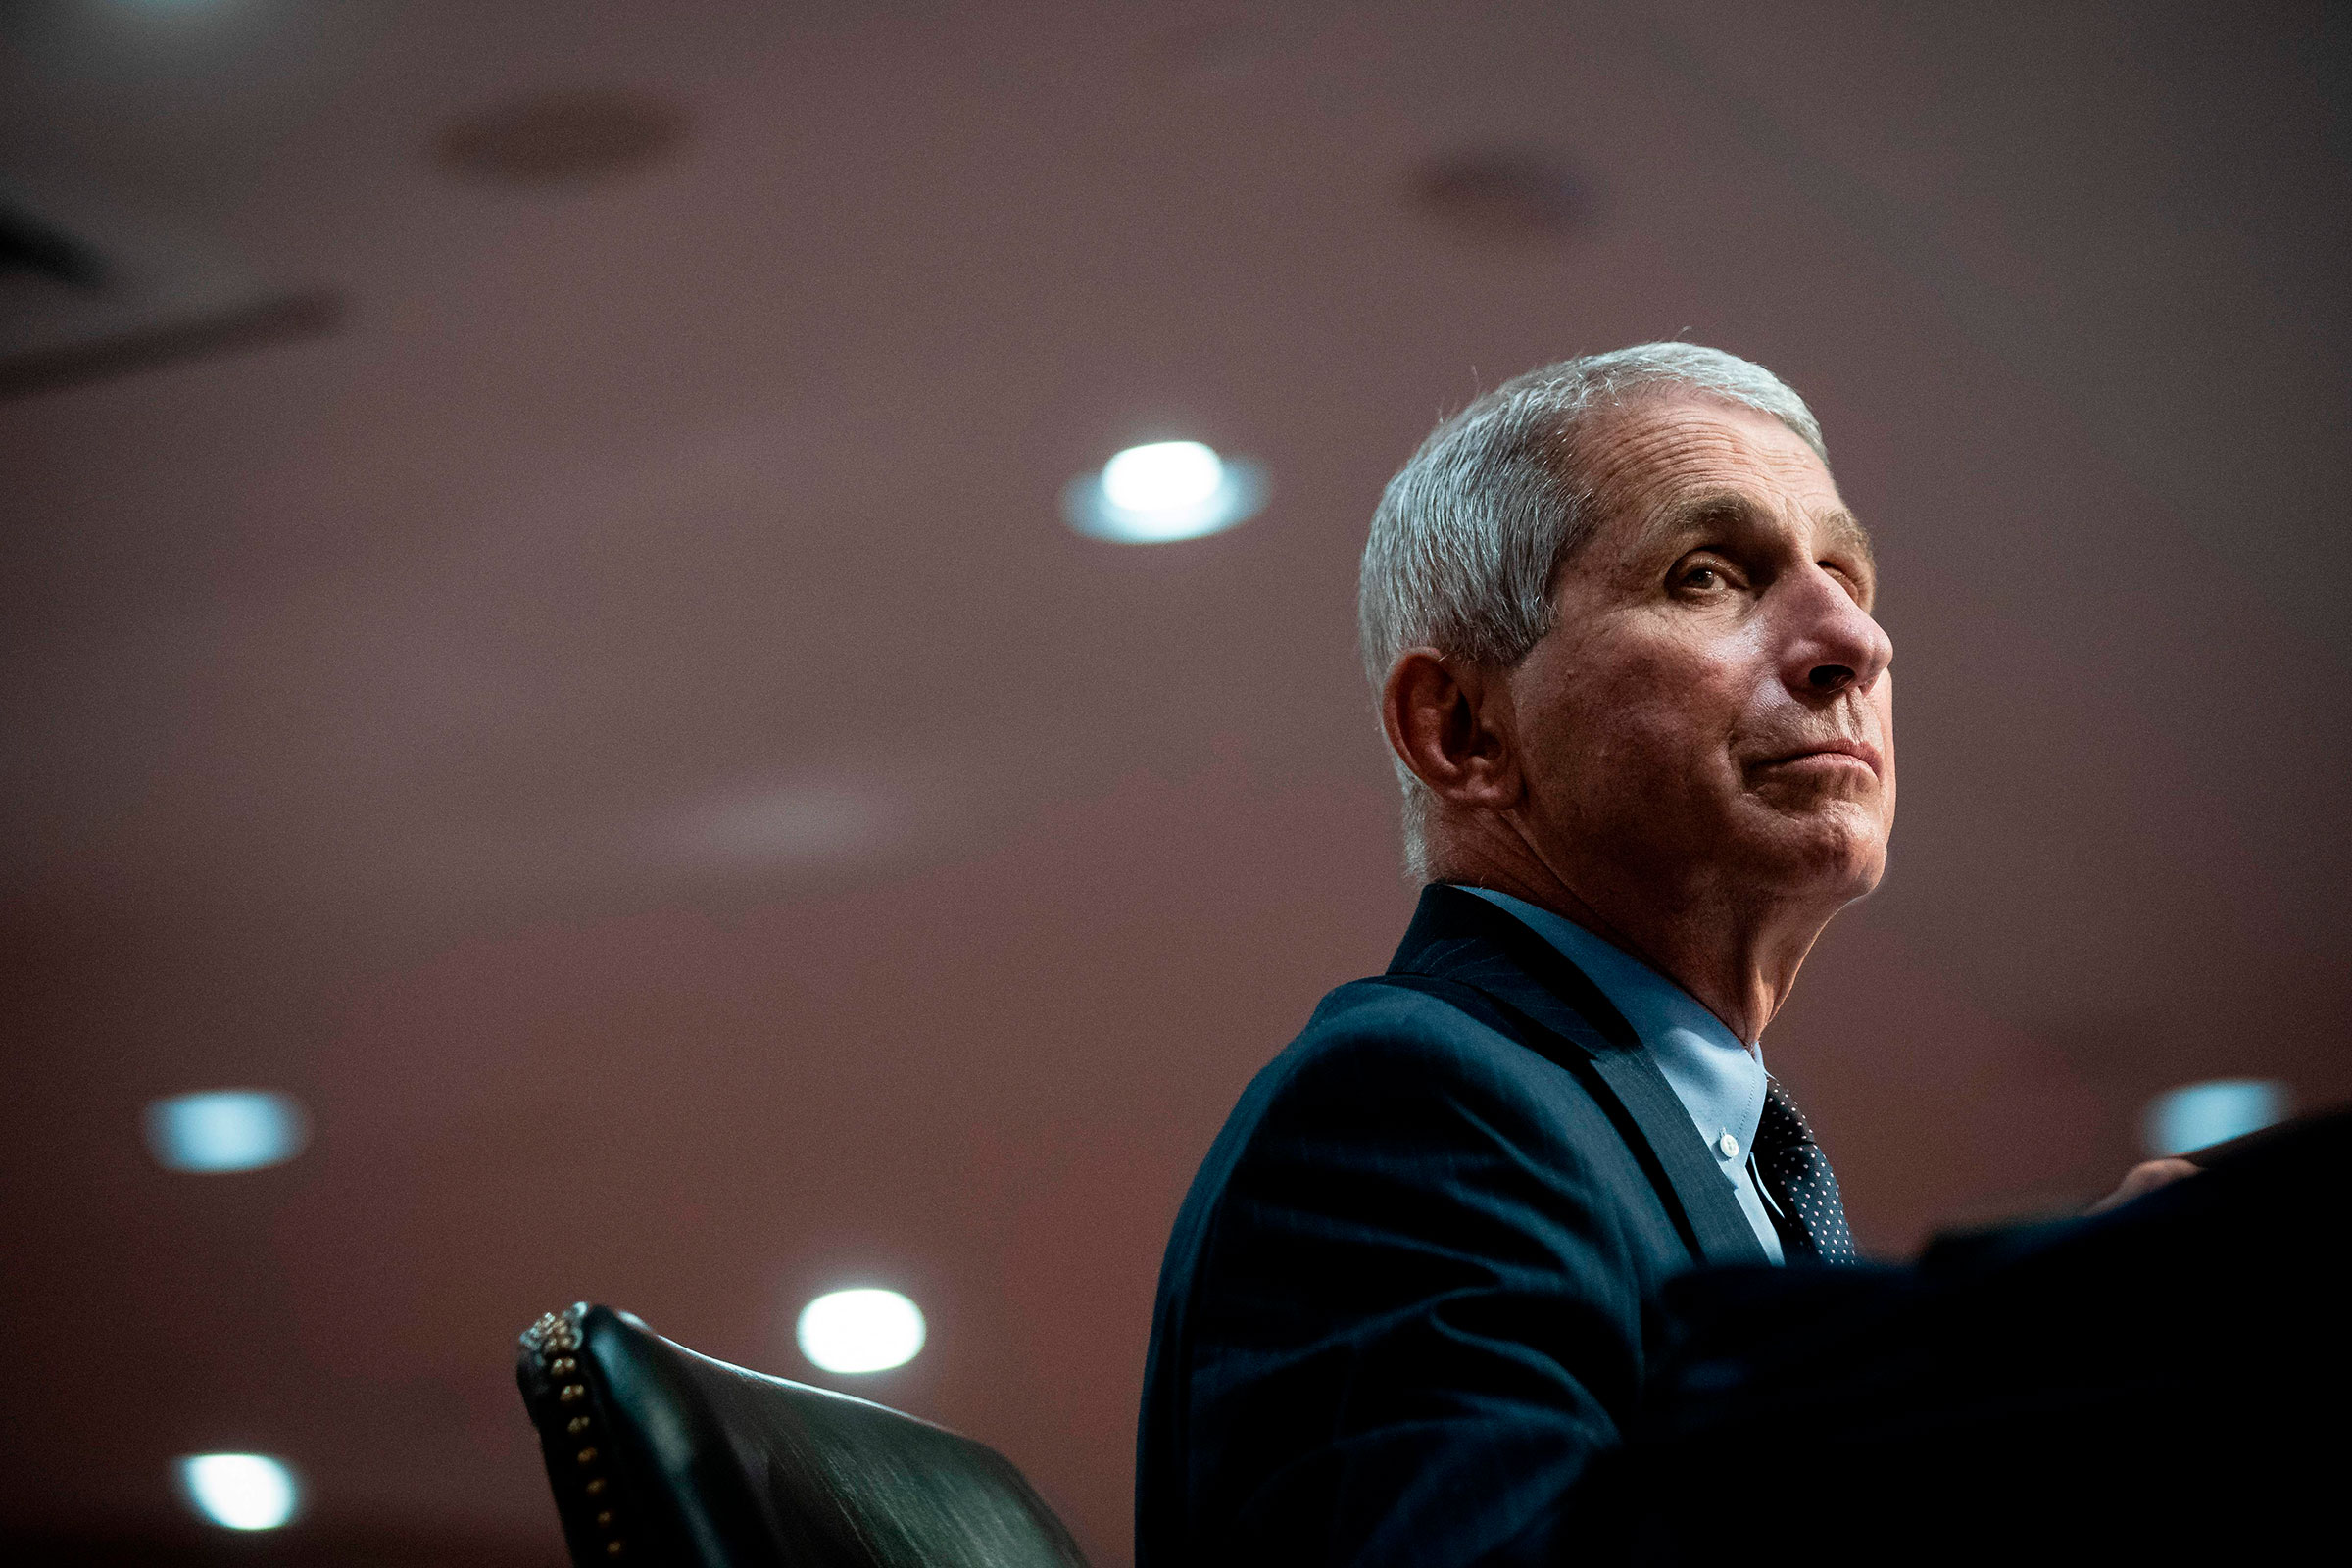 Anthony Fauci, director of the National Institute of Allergy and Infectious Diseases, listens during a Senate Health, Education, Labor and Pensions Committee hearing in Washington, DC, on June 30, 2020. (Al Drago—AFP/Getty Images)